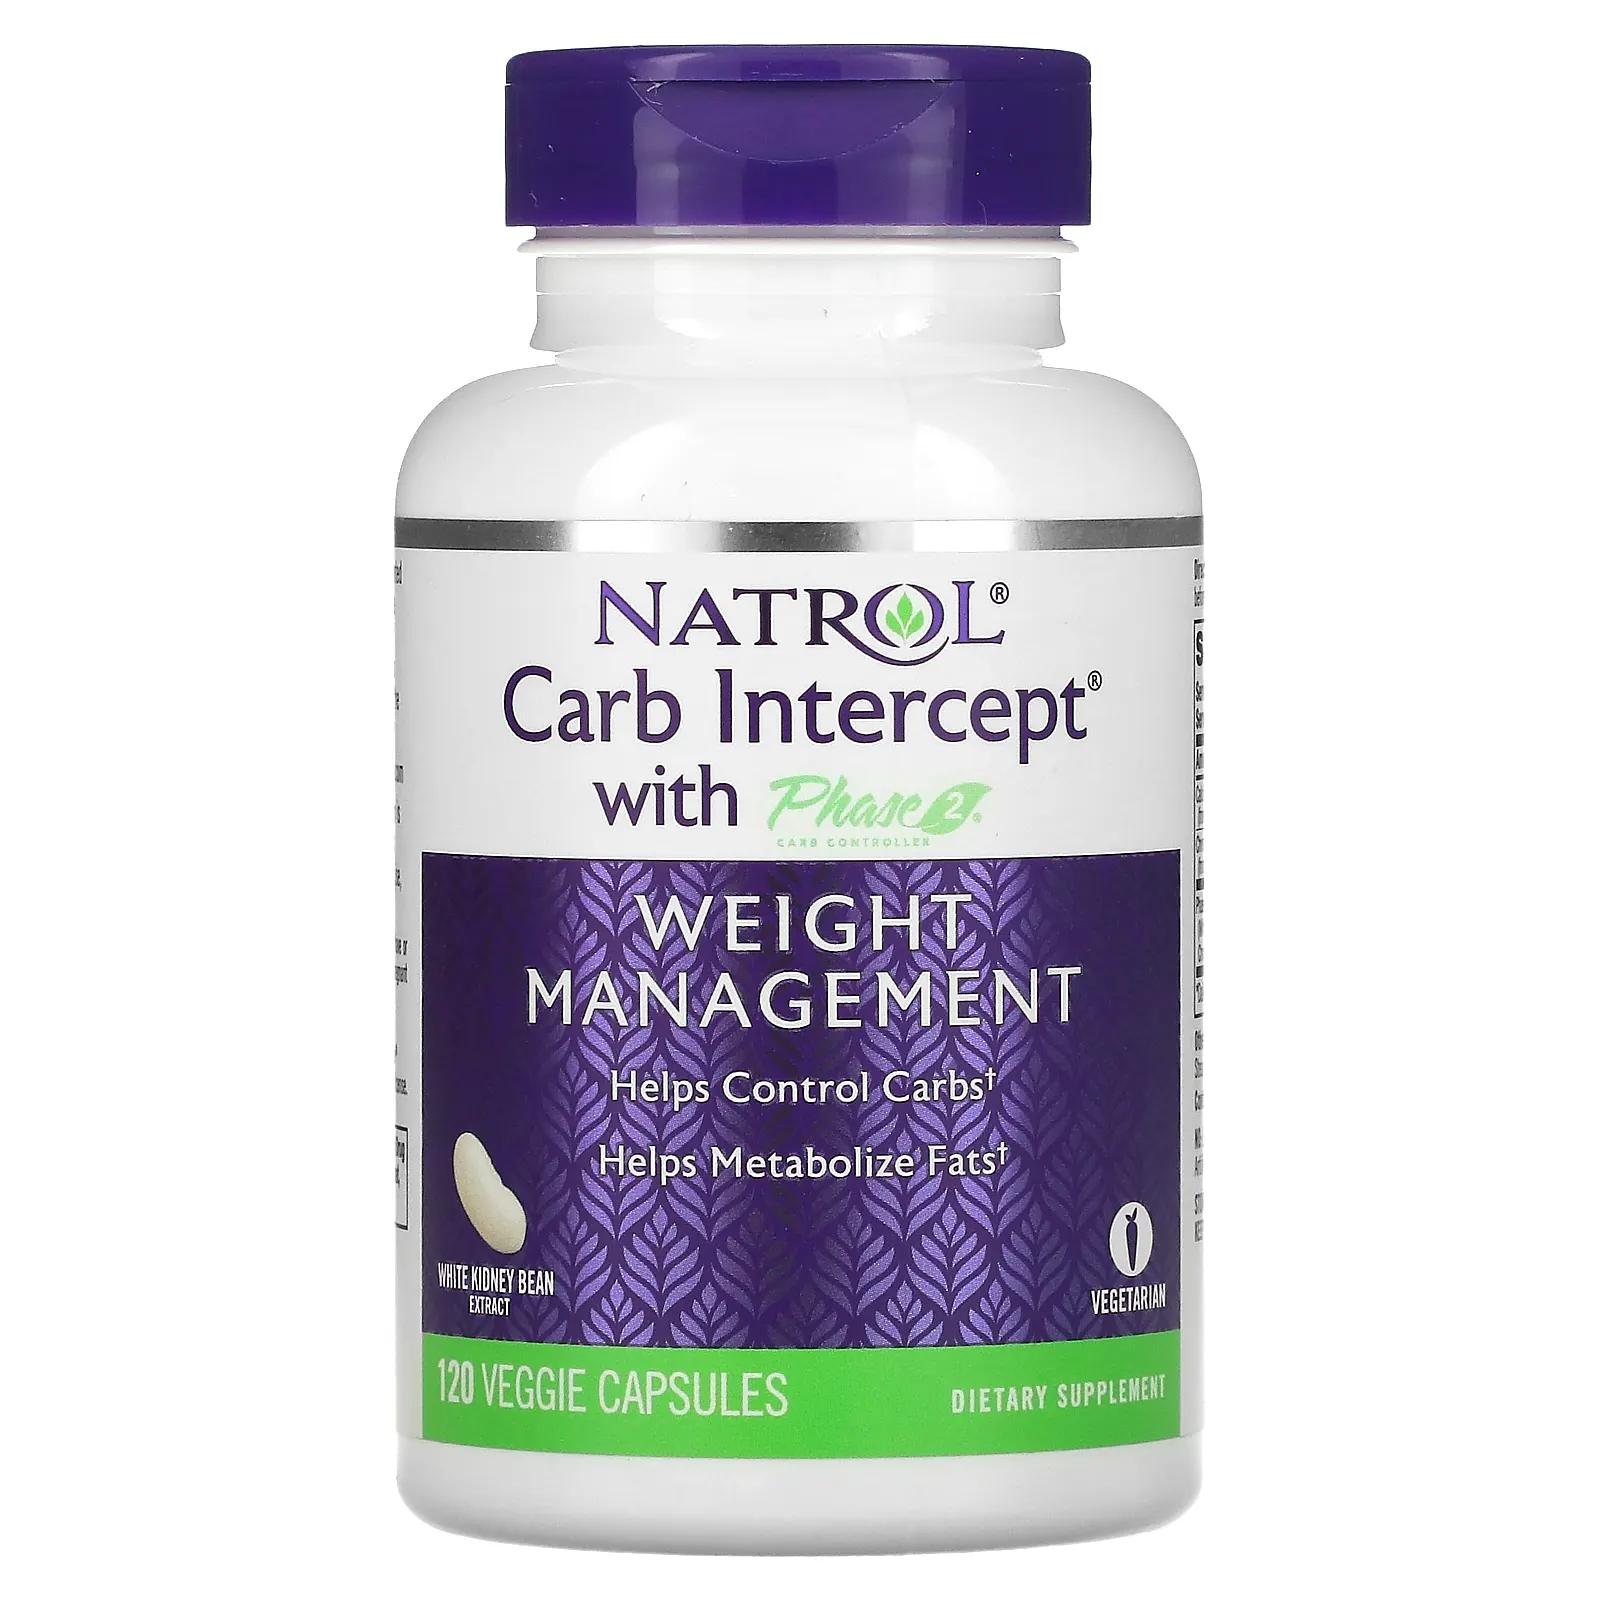 Natrol Carb Intercept with Phase 2 Carb Controller 1000 mg 120 Veggie Capsules natrol carb intercept with phase 2 carb controller 1000 mg 120 veggie capsules